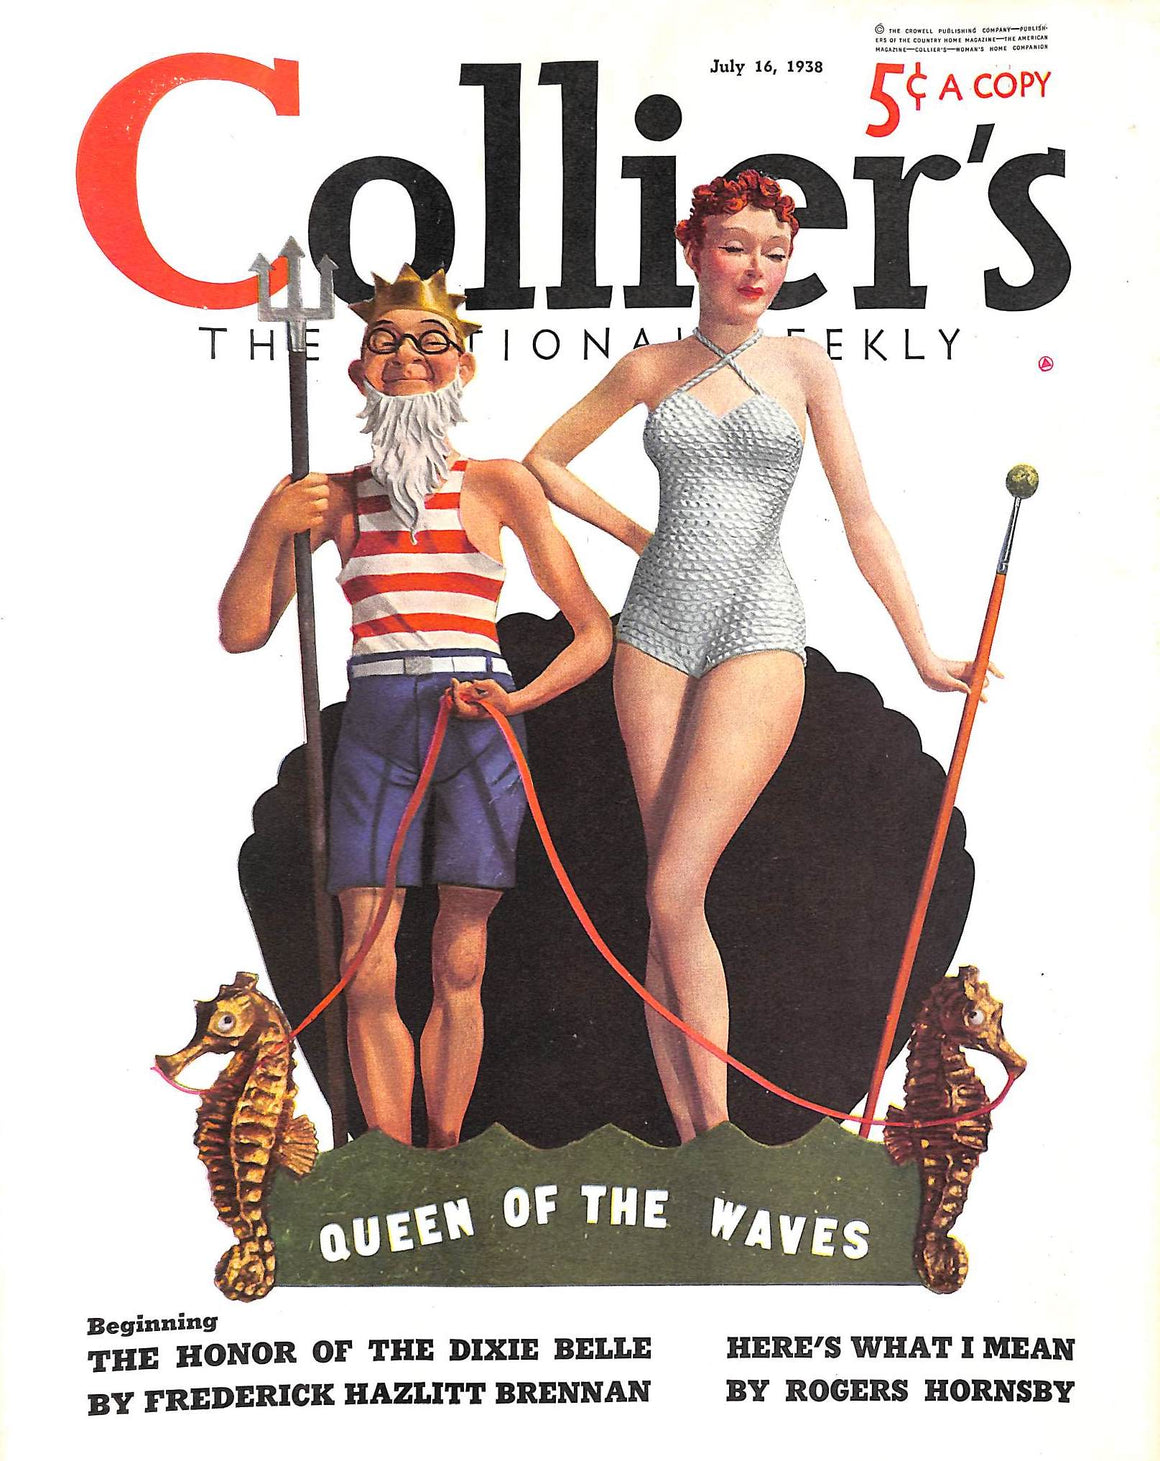 Collier's July 16, 1938